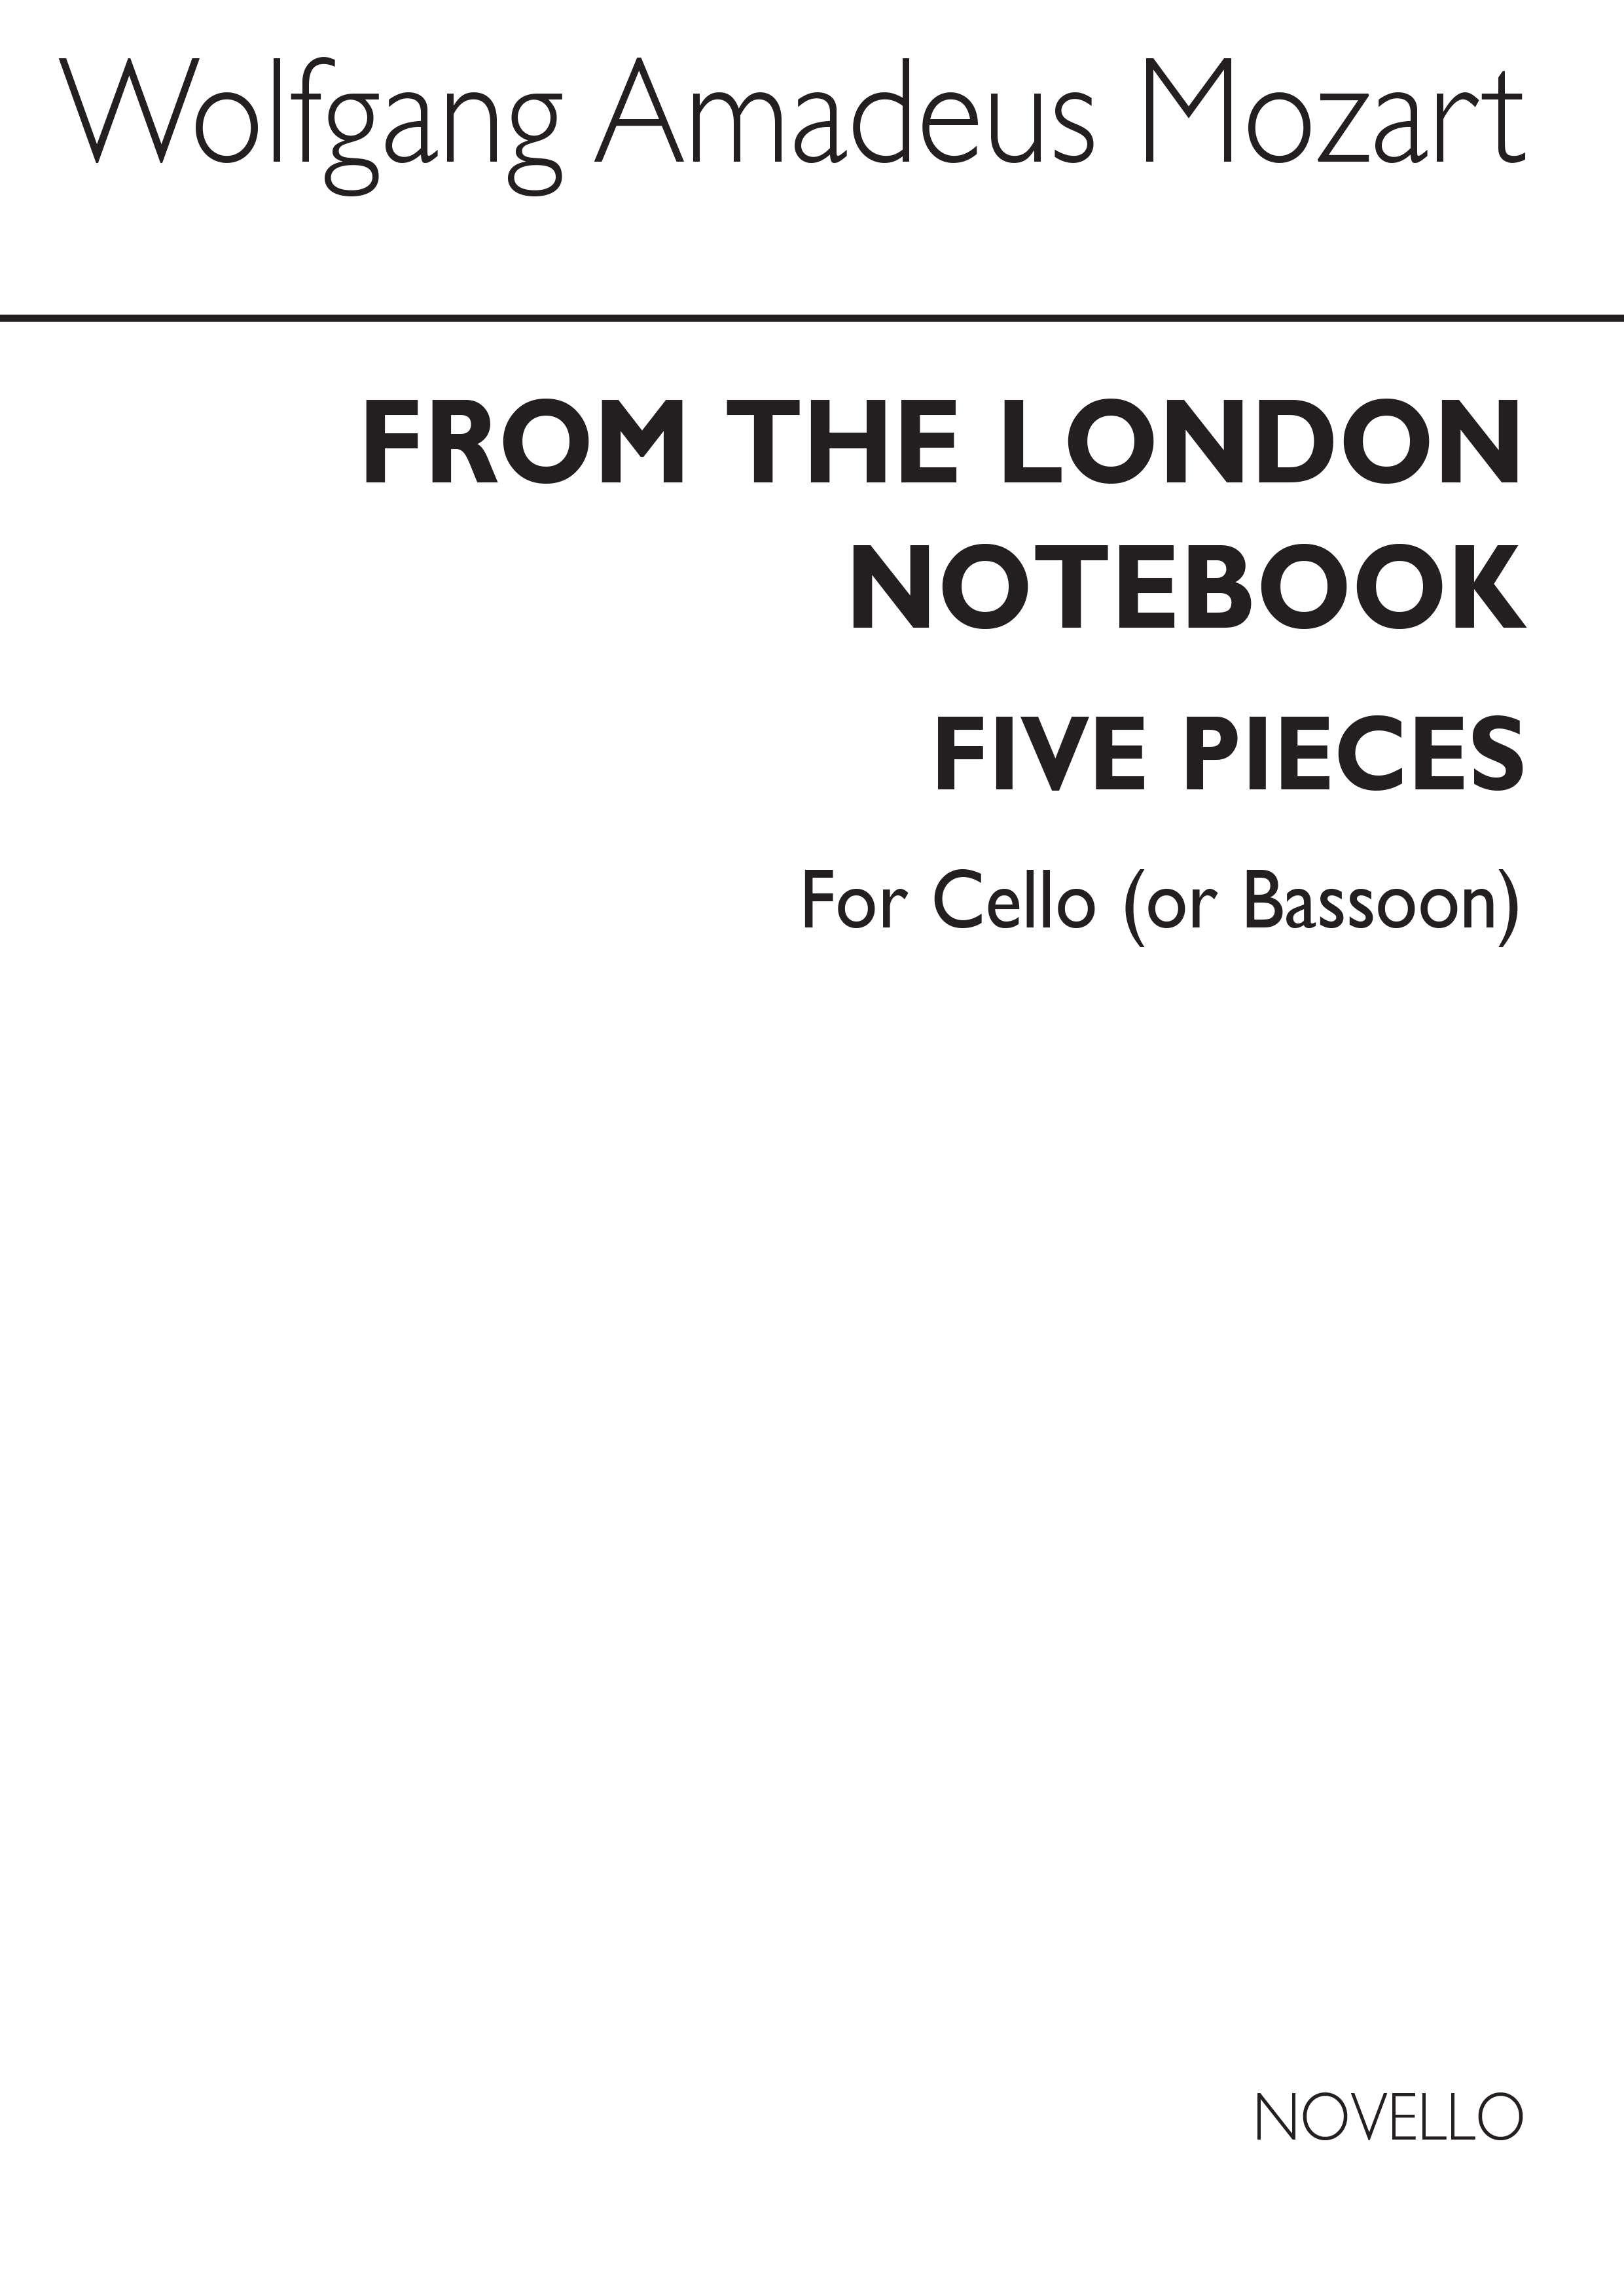 Wolfgang Amadeus Mozart: From The London Notebook (Cello and Bassoon Part):